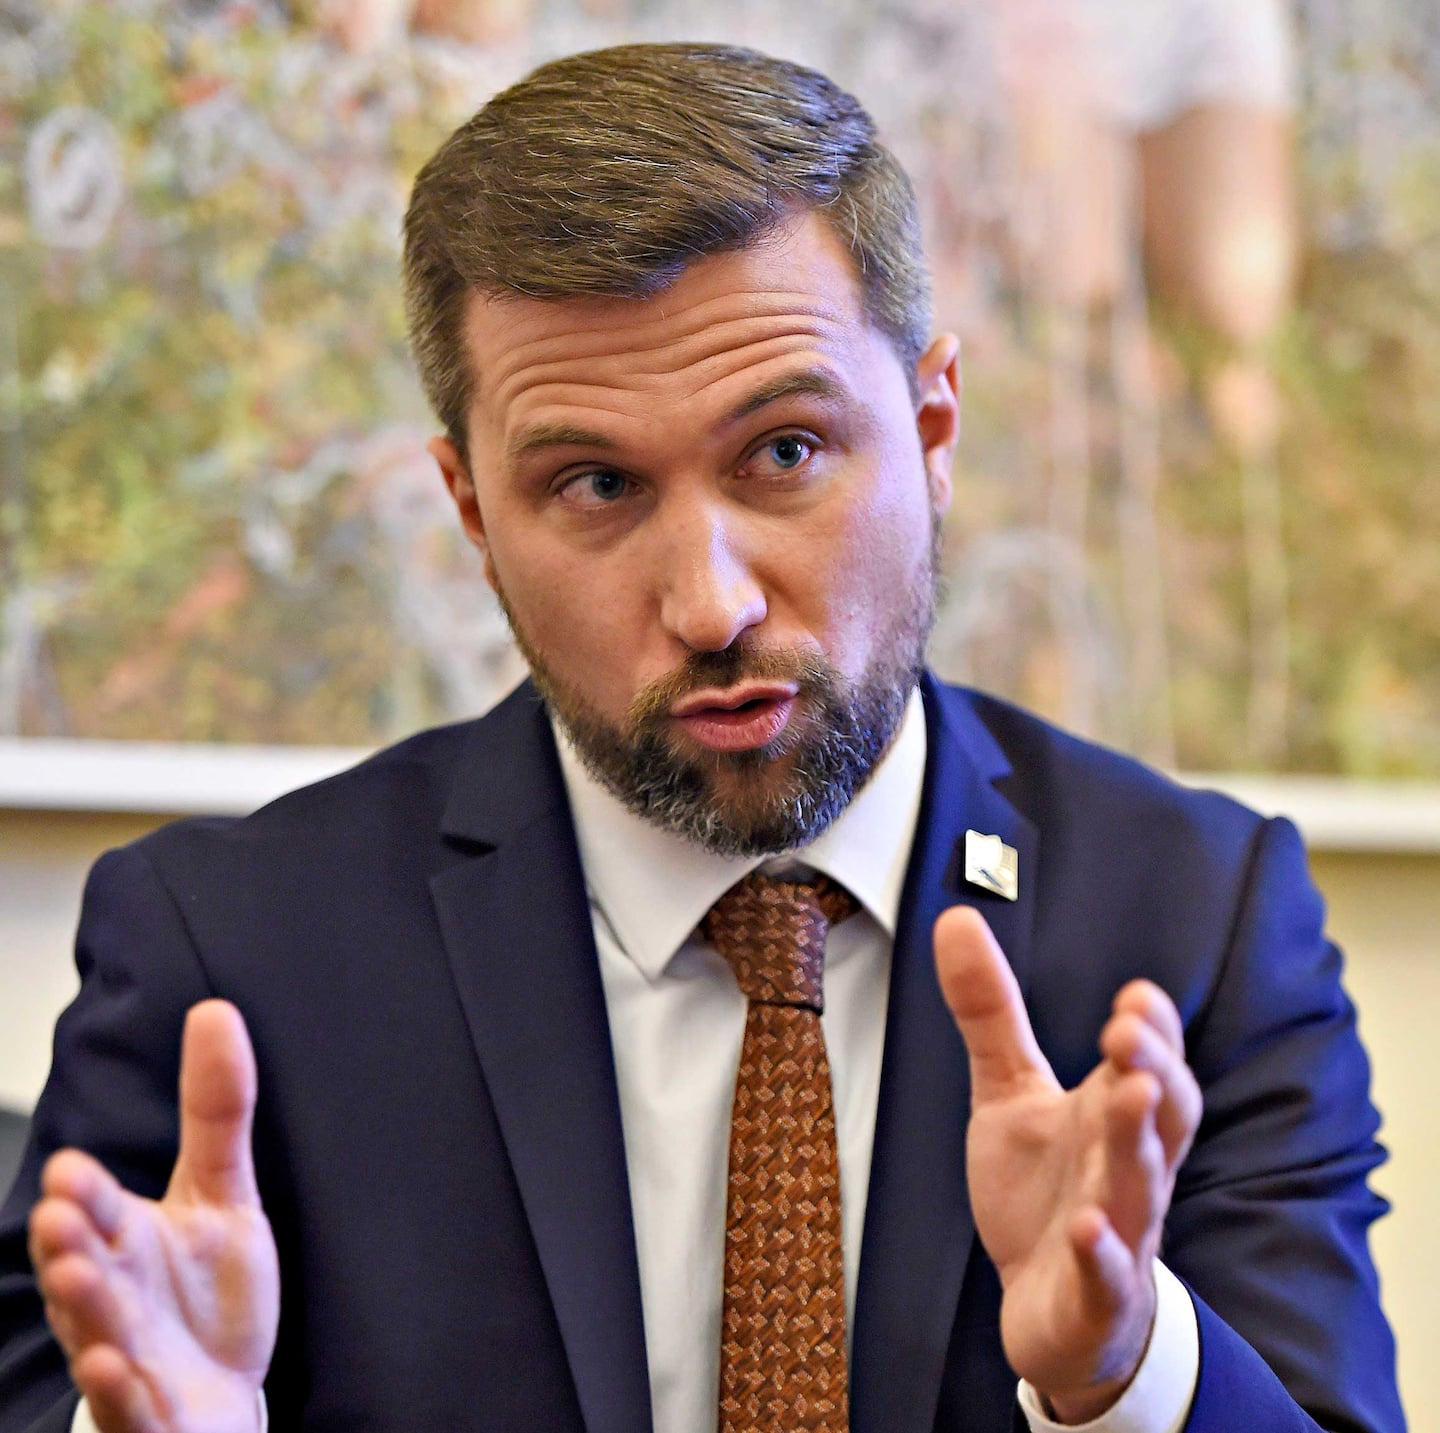 Neutral in the polls: the new candidates will make the difference, believes Gabriel Nadeau-Dubois